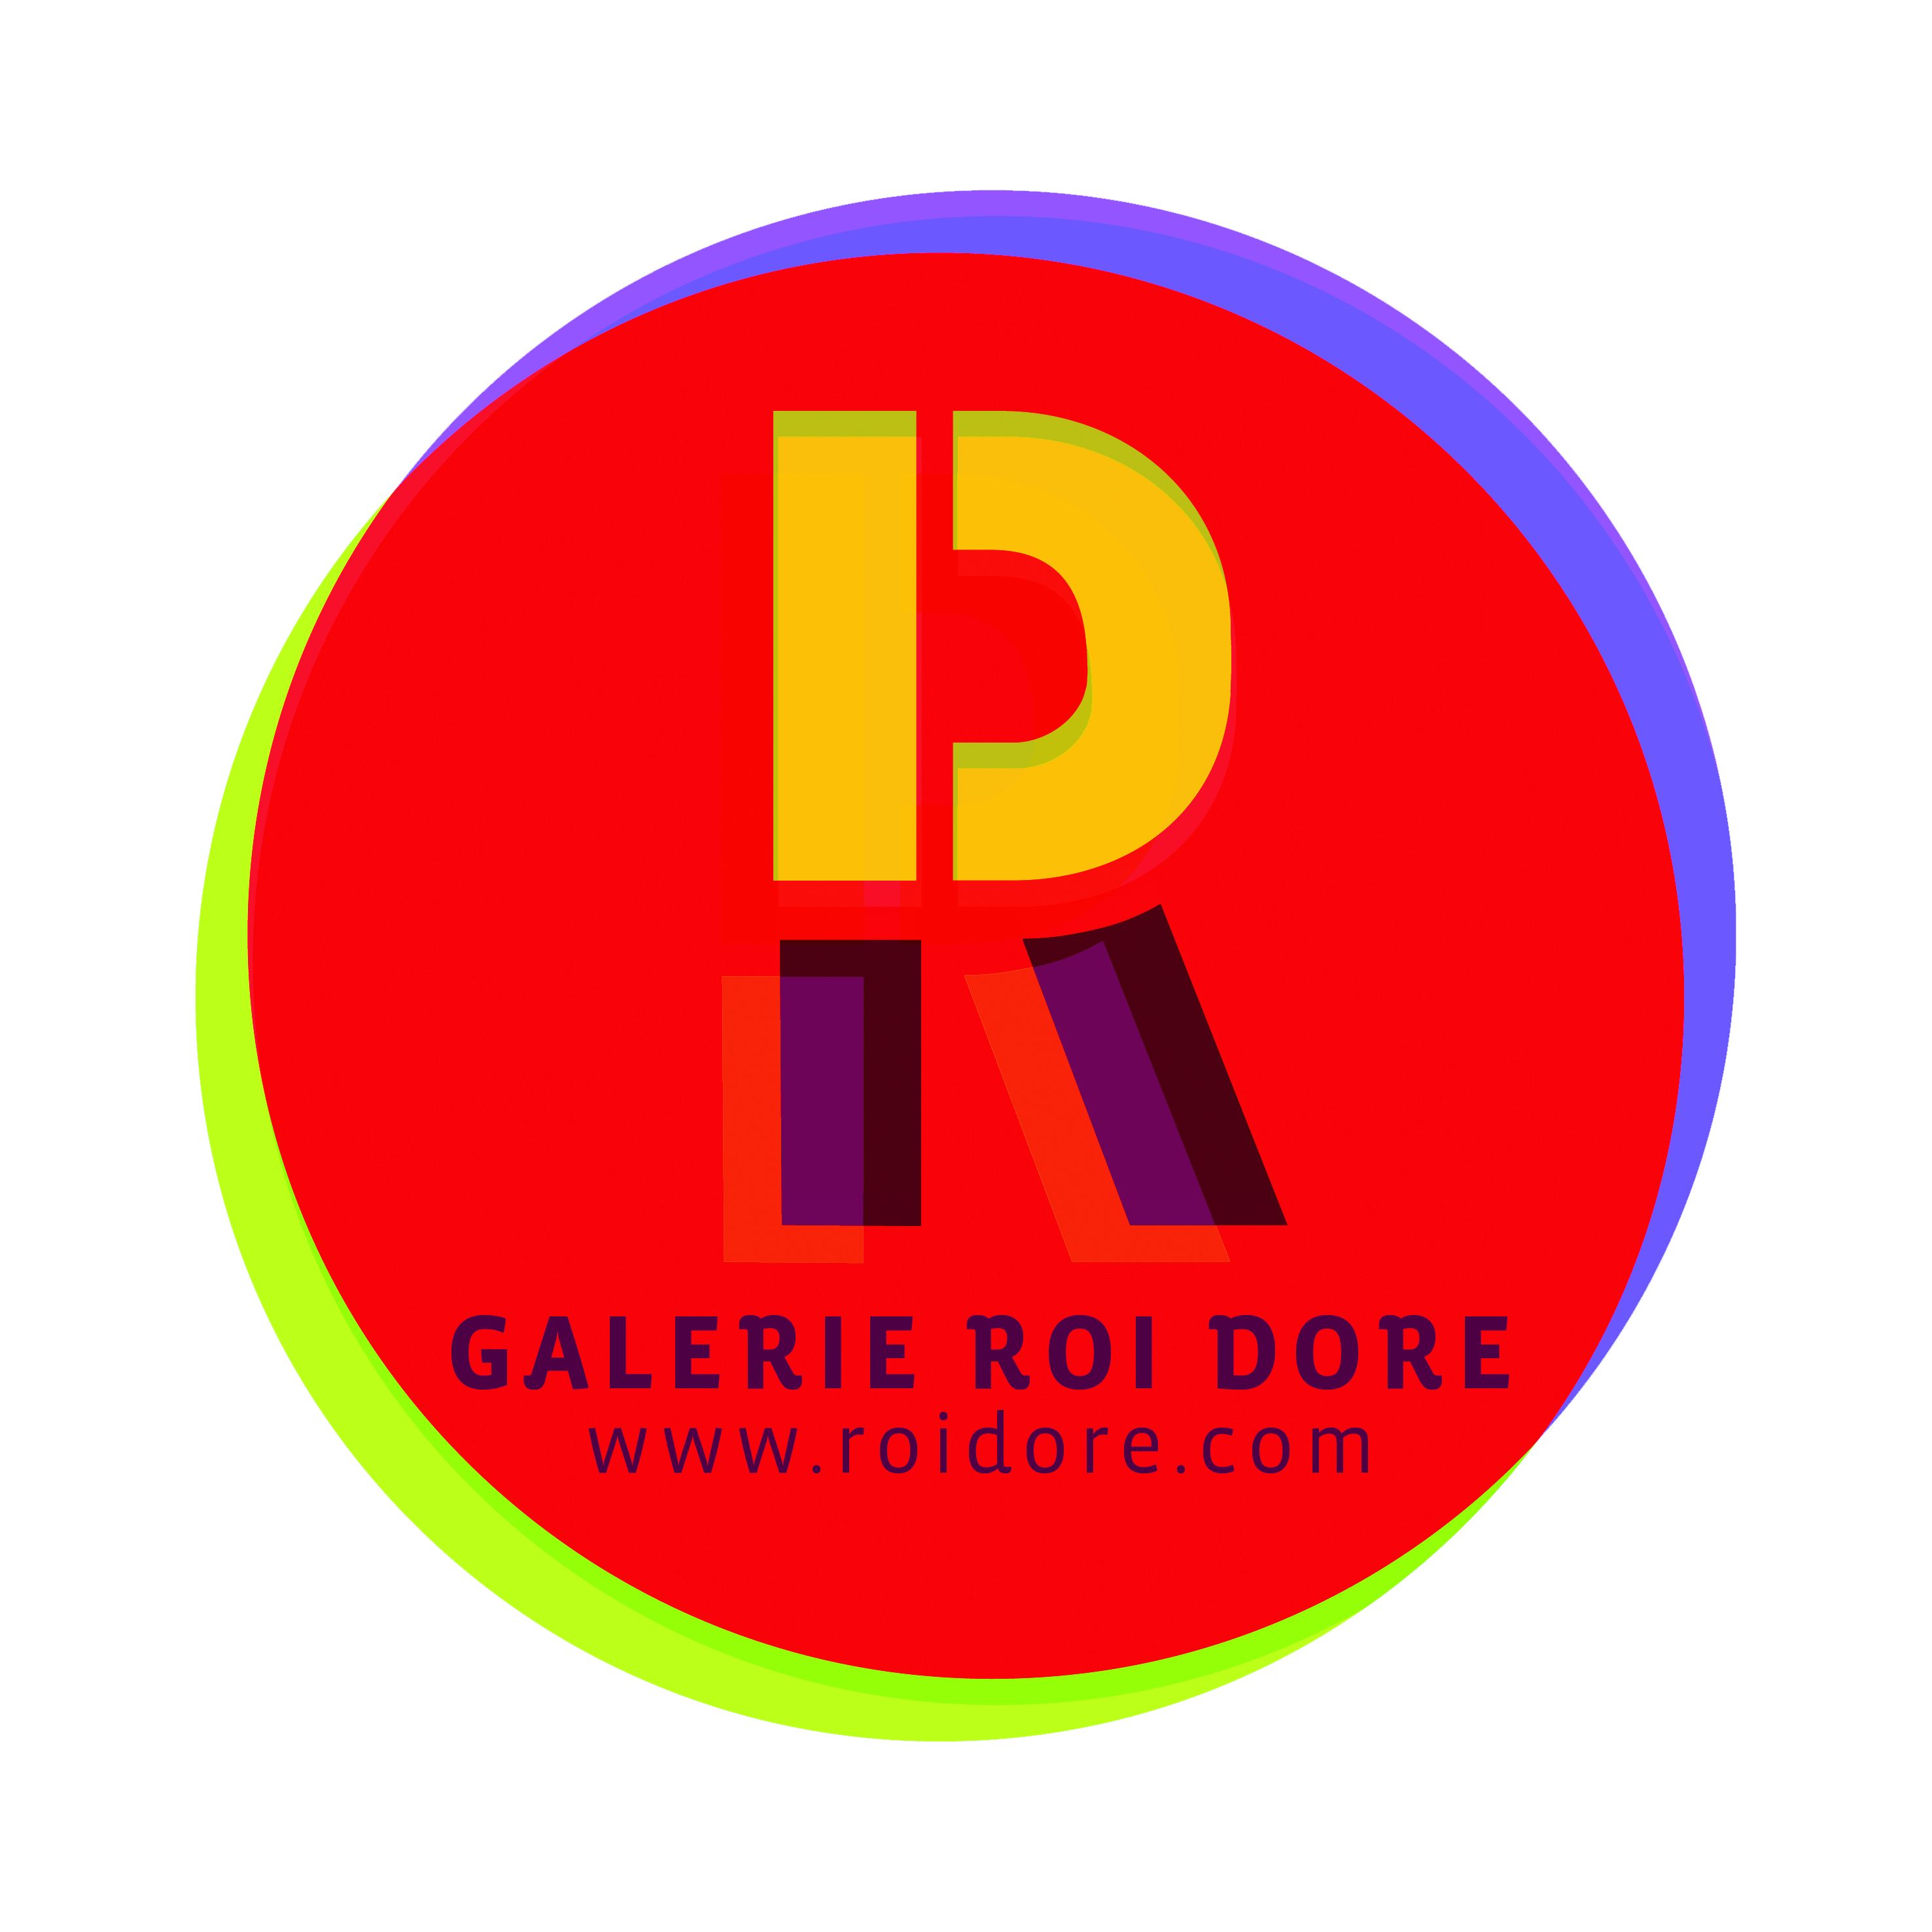 http://www.roidore.com/fr/indexfr.html